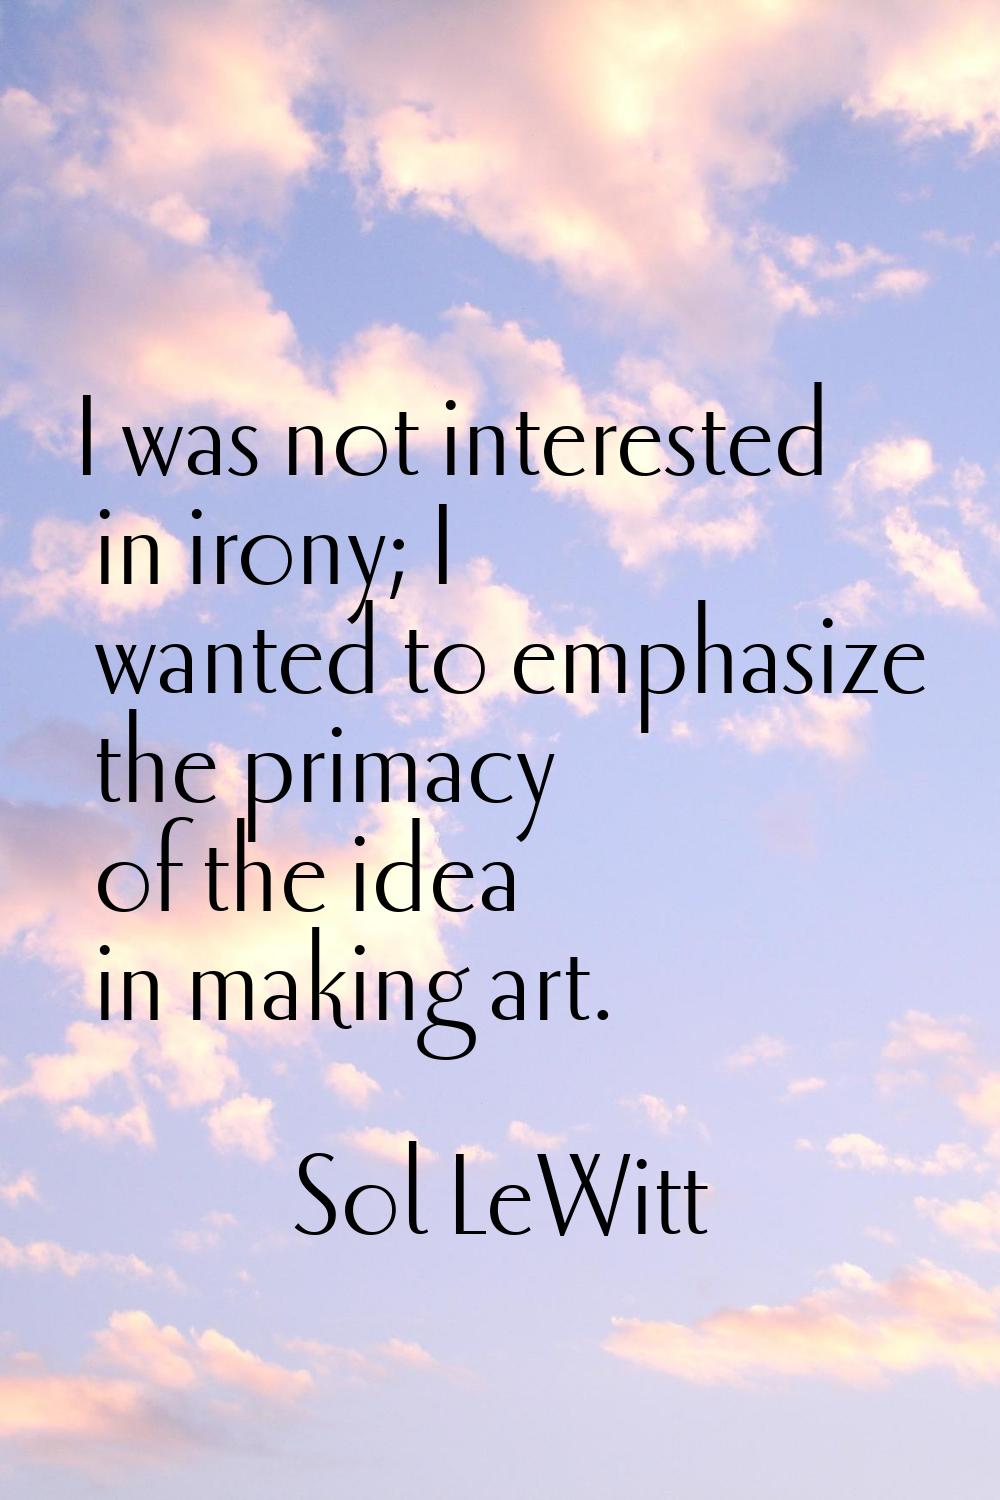 I was not interested in irony; I wanted to emphasize the primacy of the idea in making art.